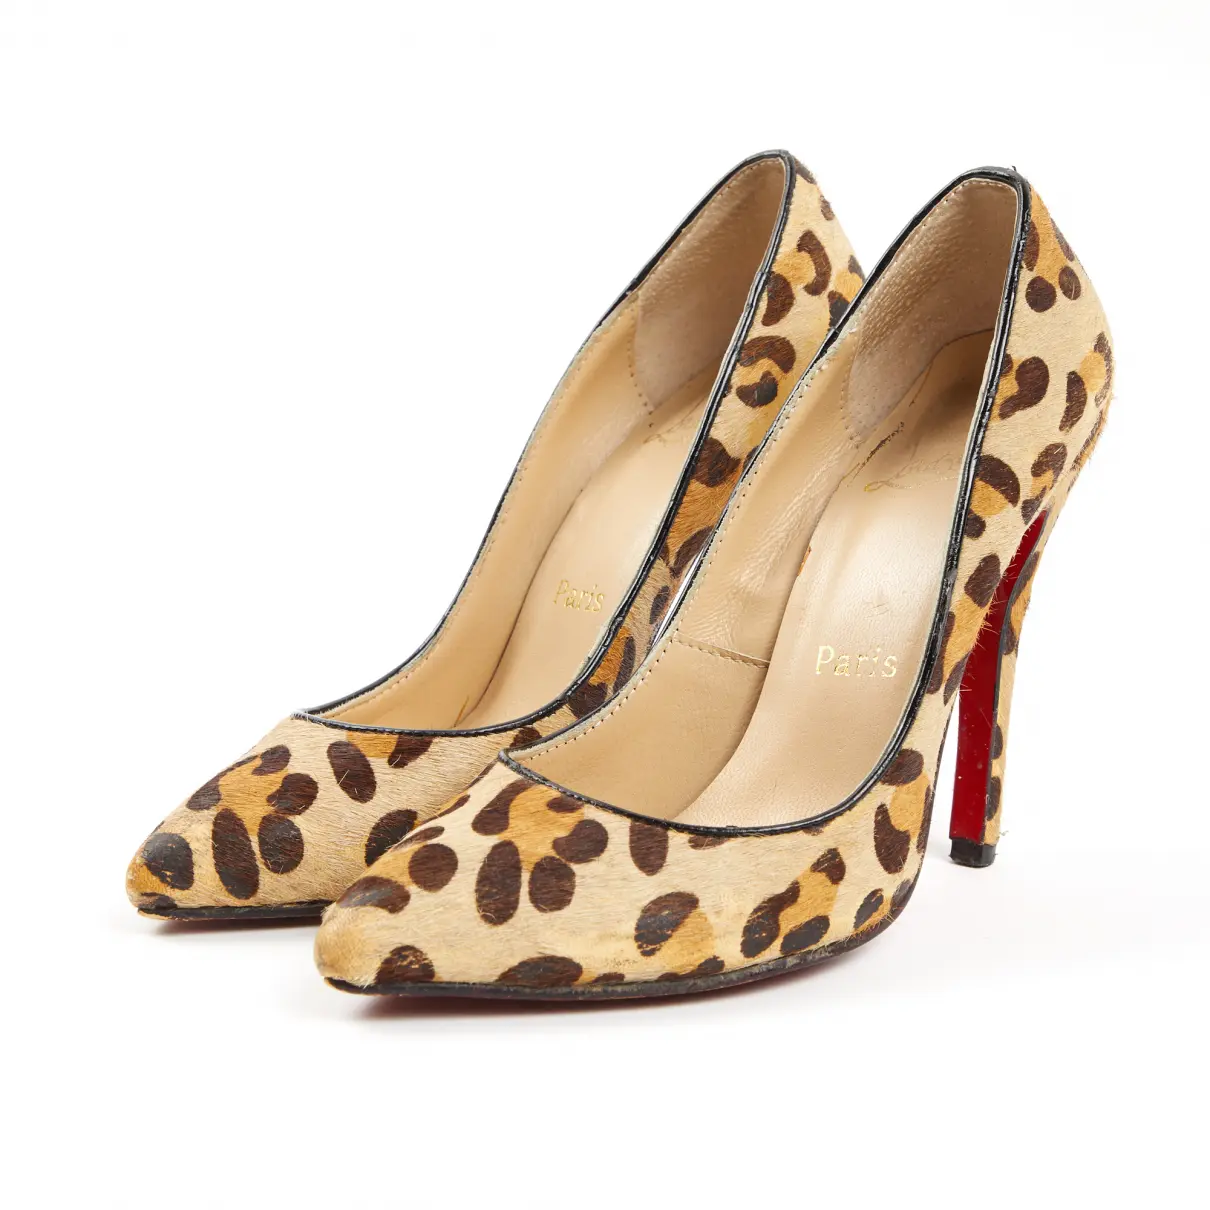 Buy Christian Louboutin Pigalle pony-style calfskin heels online